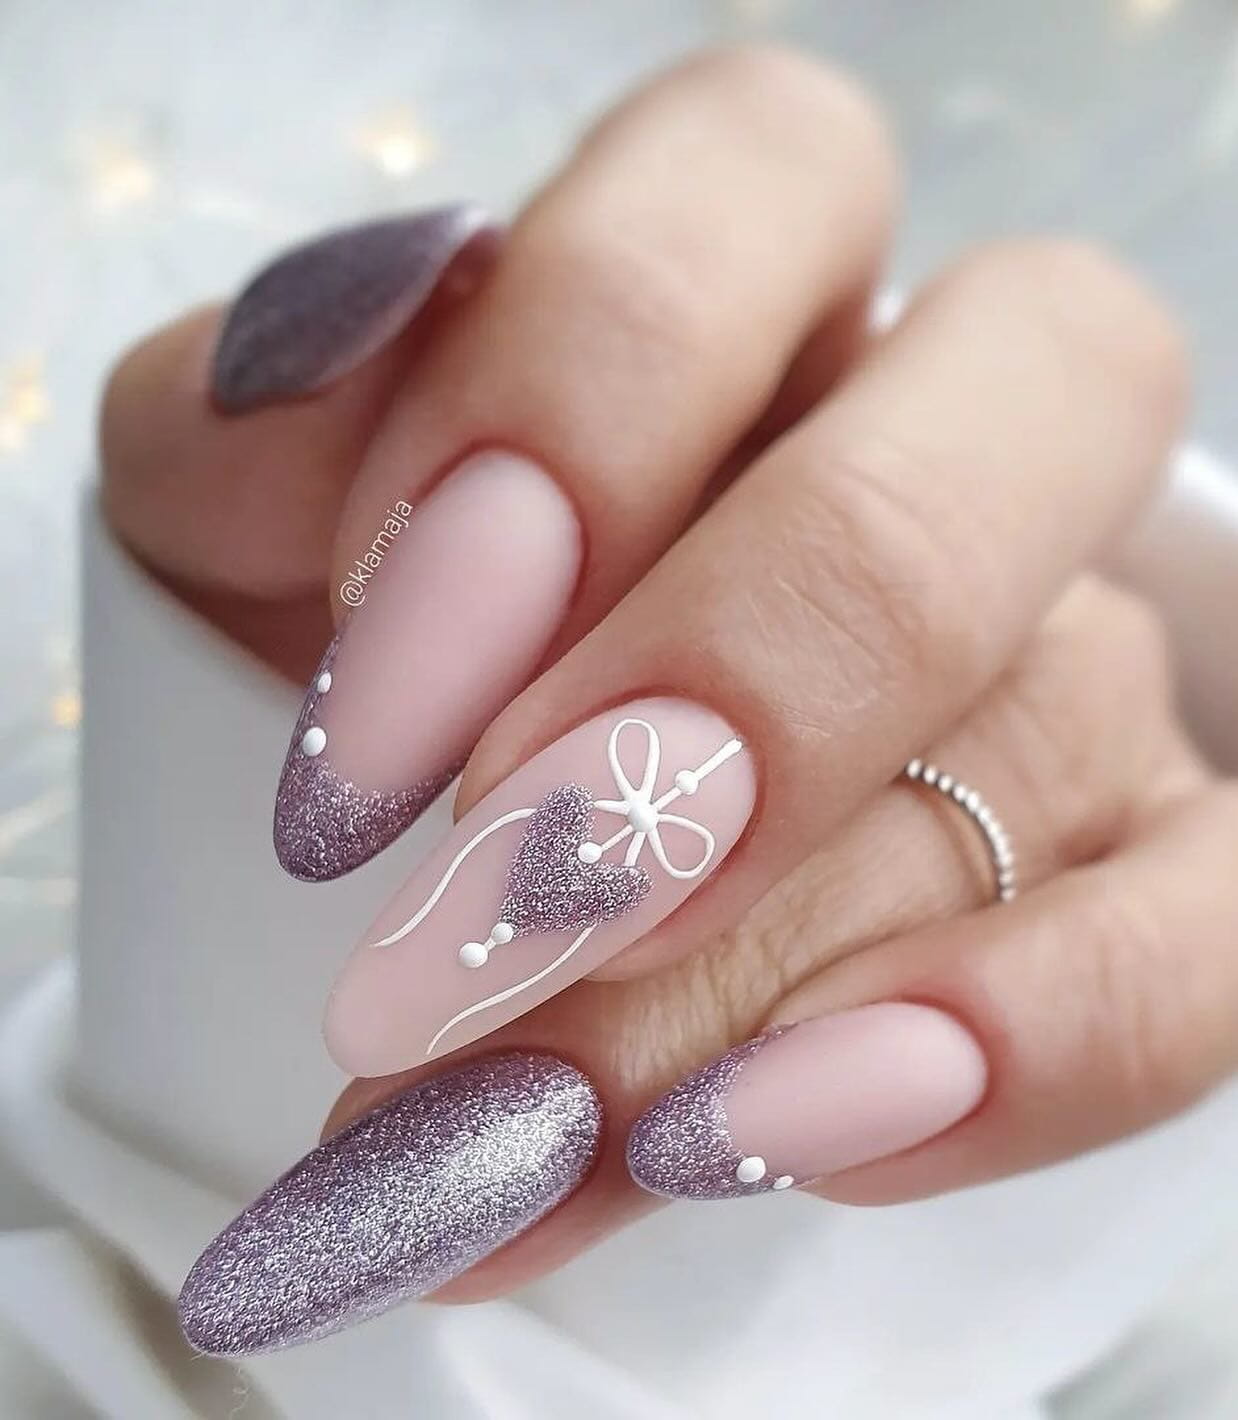 100+ Gorgeous Winter Nail Designs And Ideas images 91